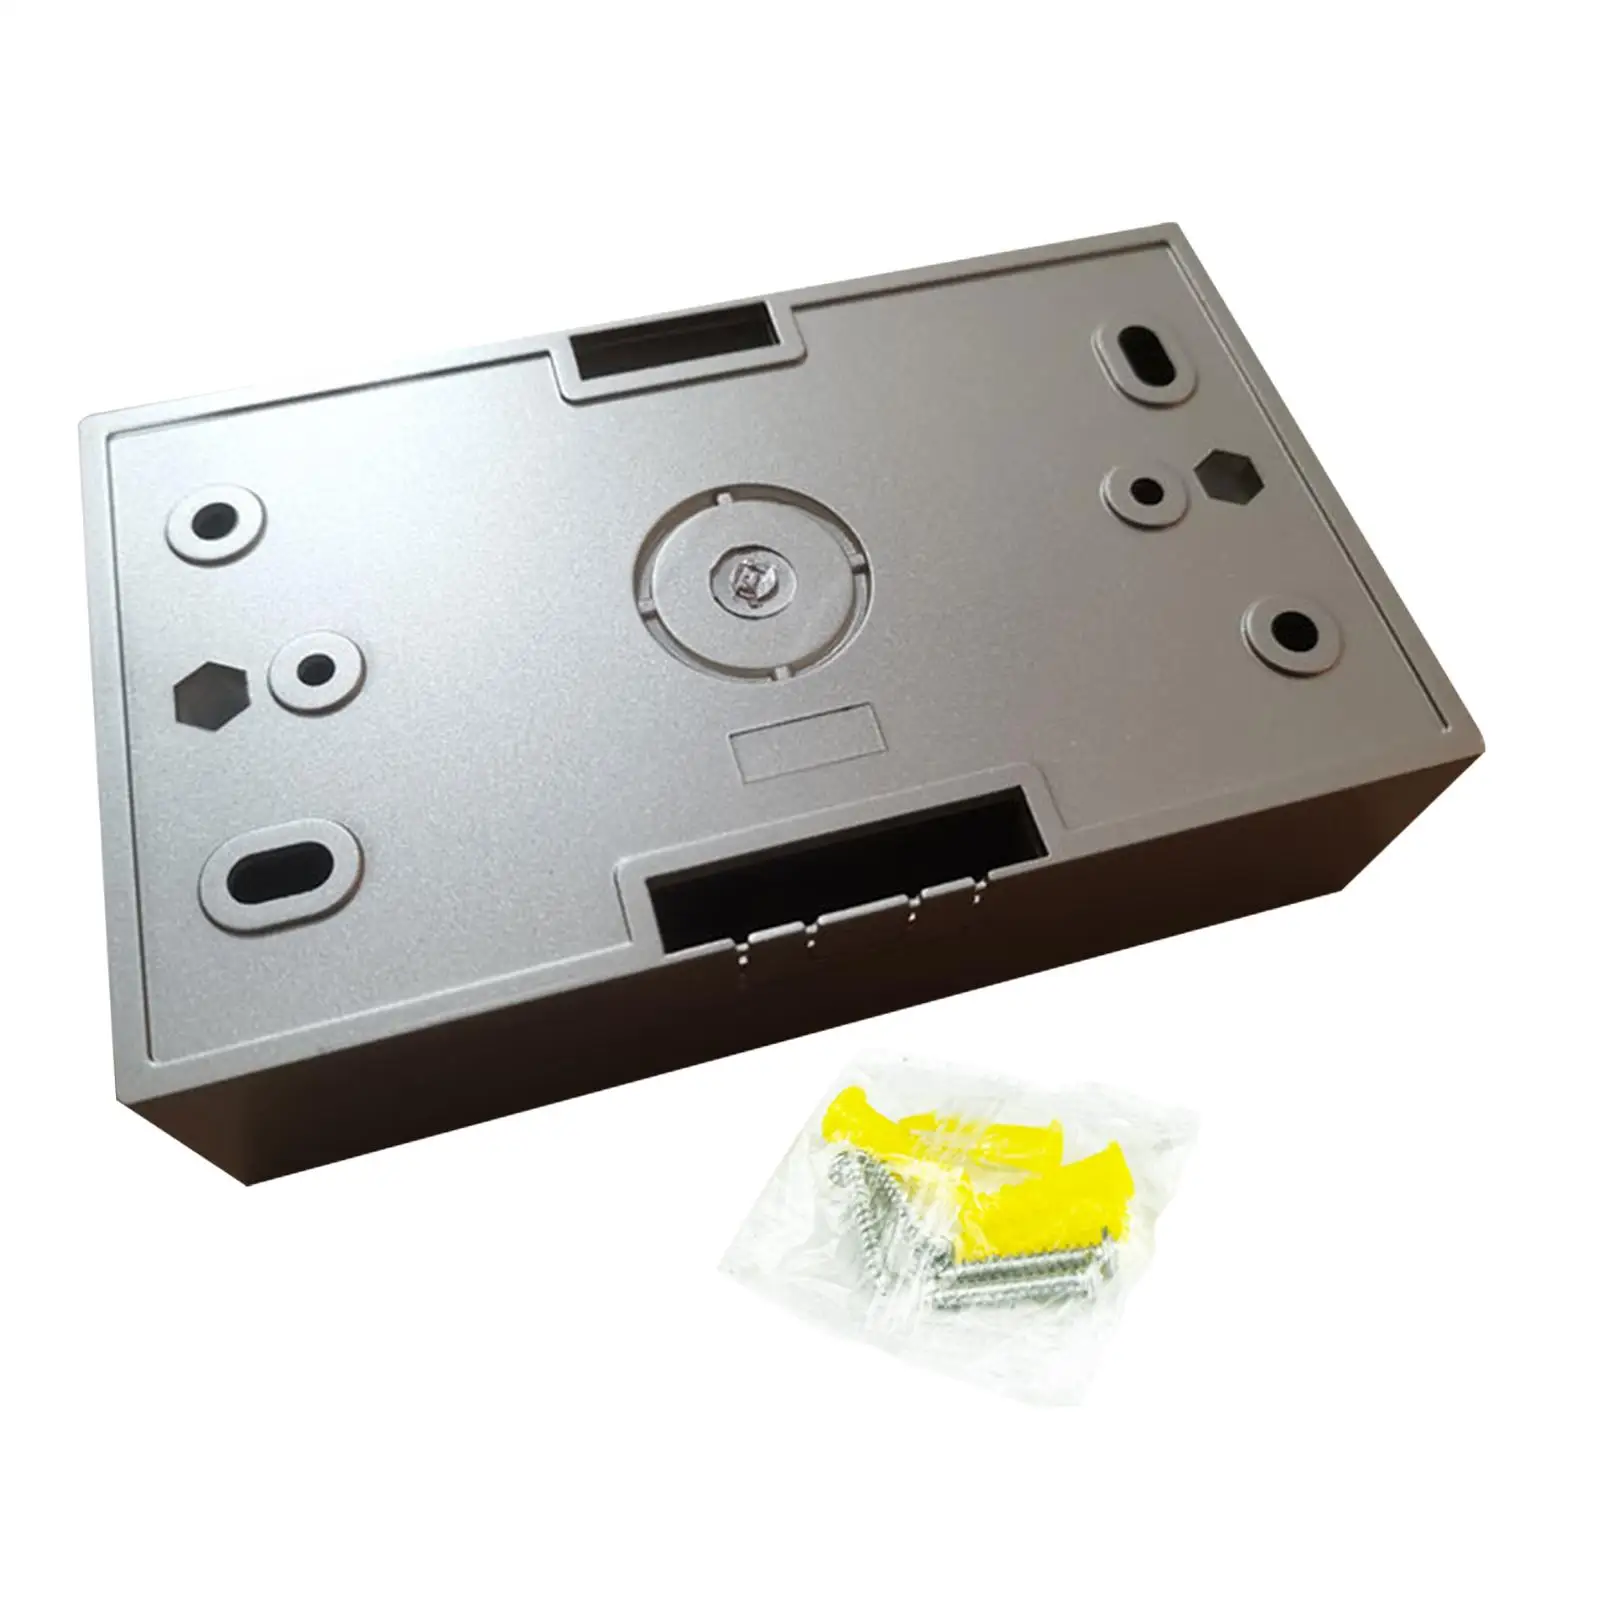 Electrical Project Case Power Junction Box 146x86x40mm Dustproof Accessory Direct Replaces Project Box DIY Case Enclosure